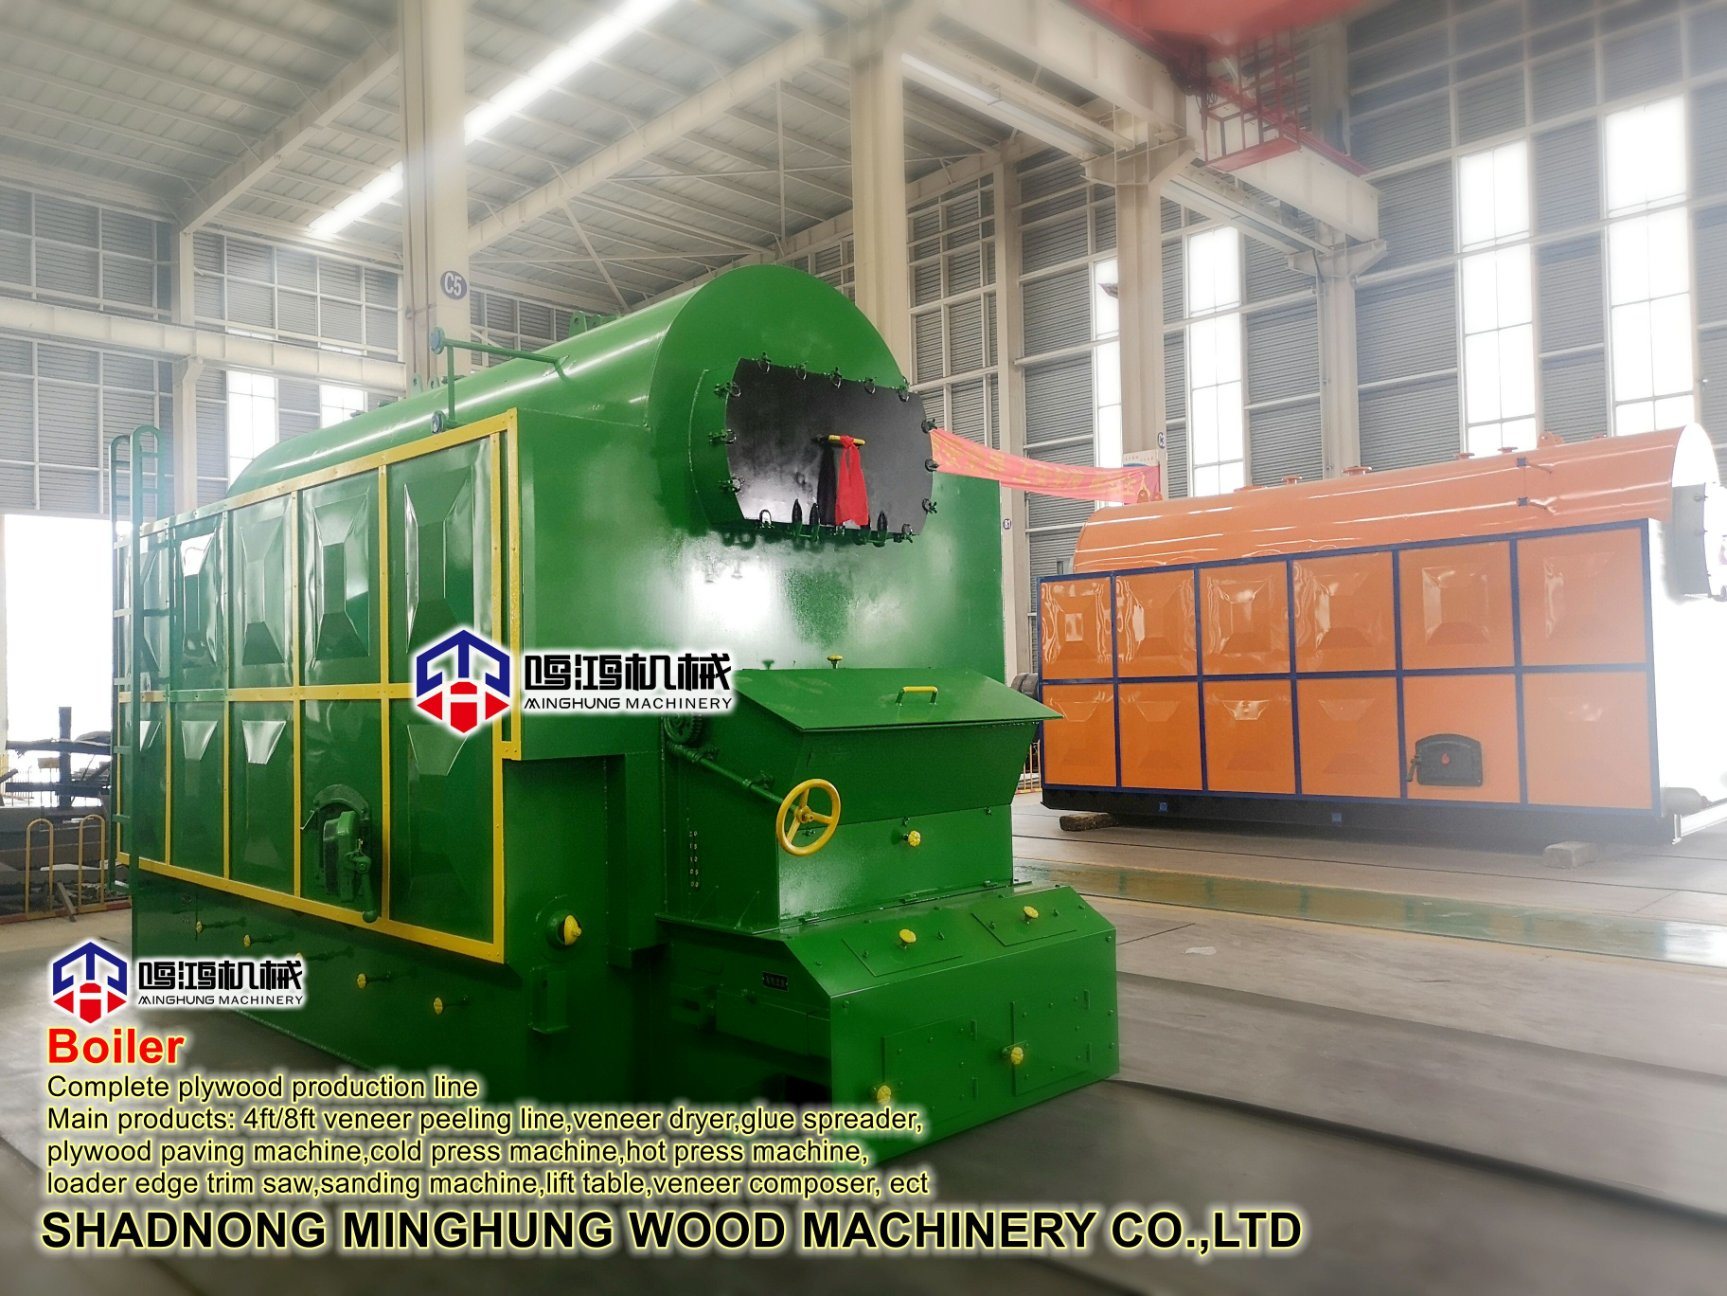 1t Steam Biomass Fired Boiler for Plywood Making